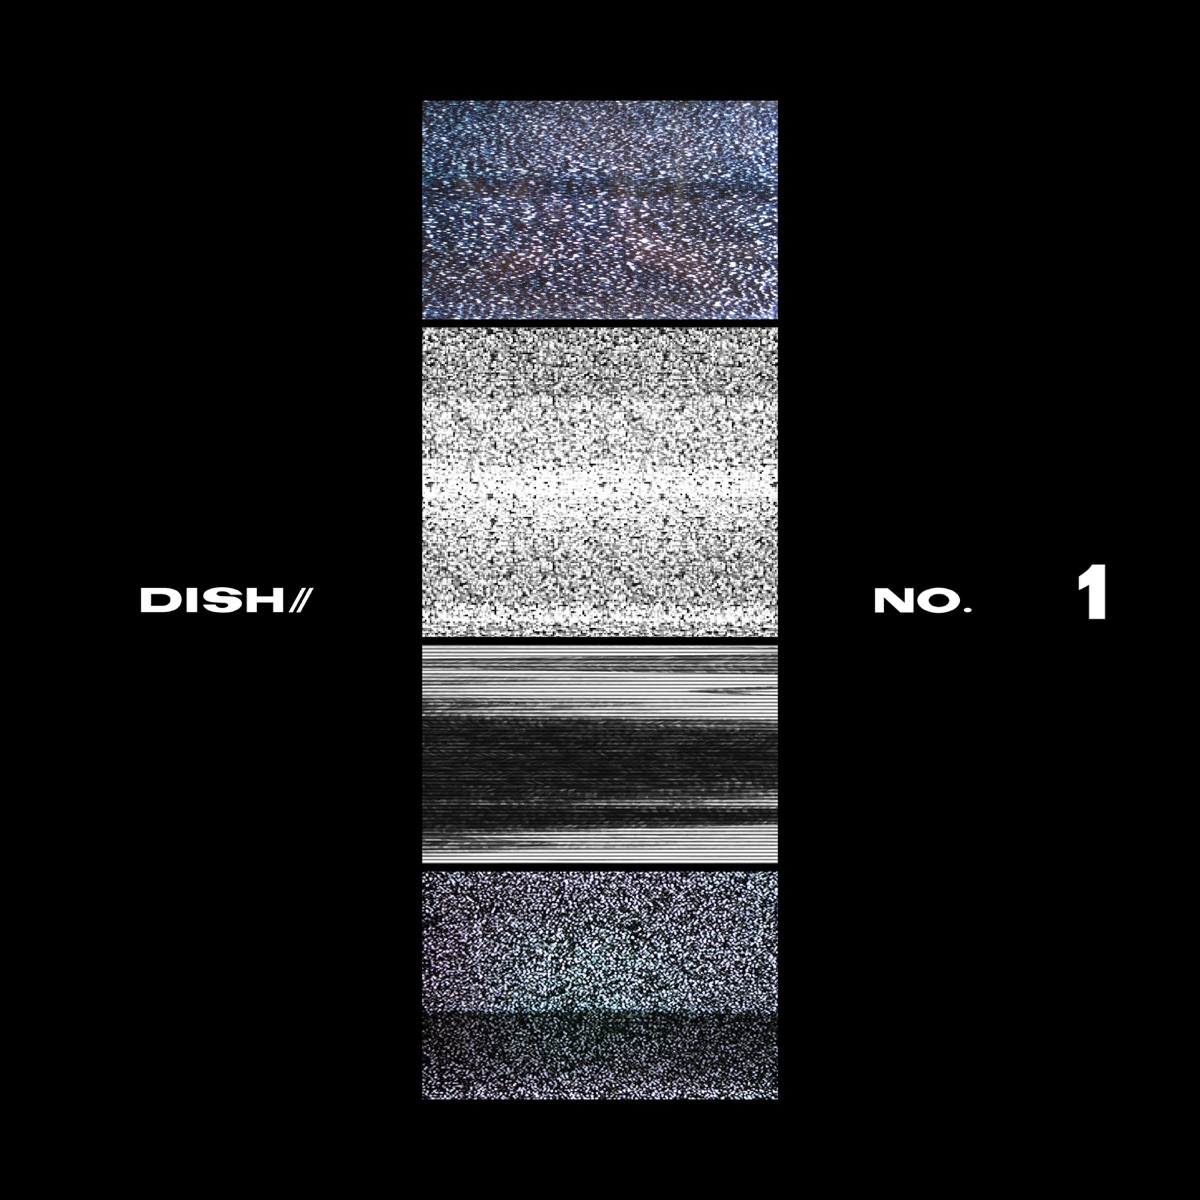 Cover art for『DISH// - No.1』from the release『No.1』